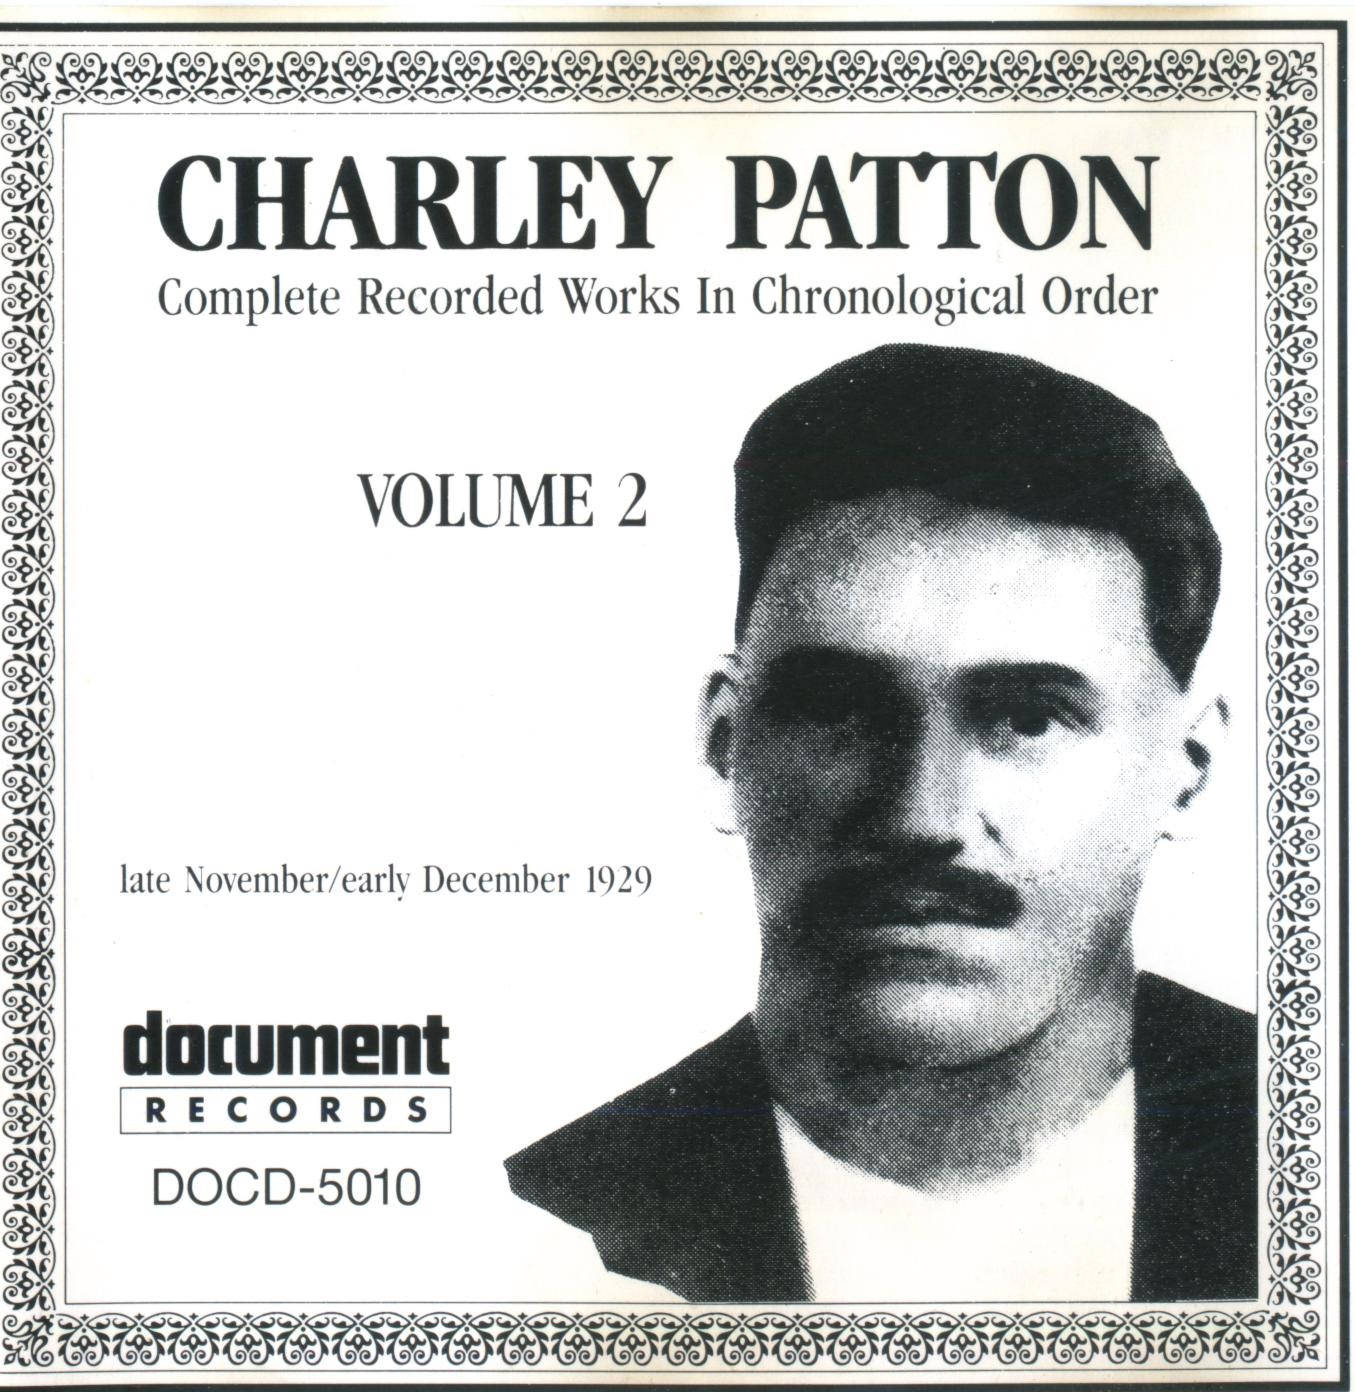 The Complete Recorded Worksof Charley Patton Wallpaper